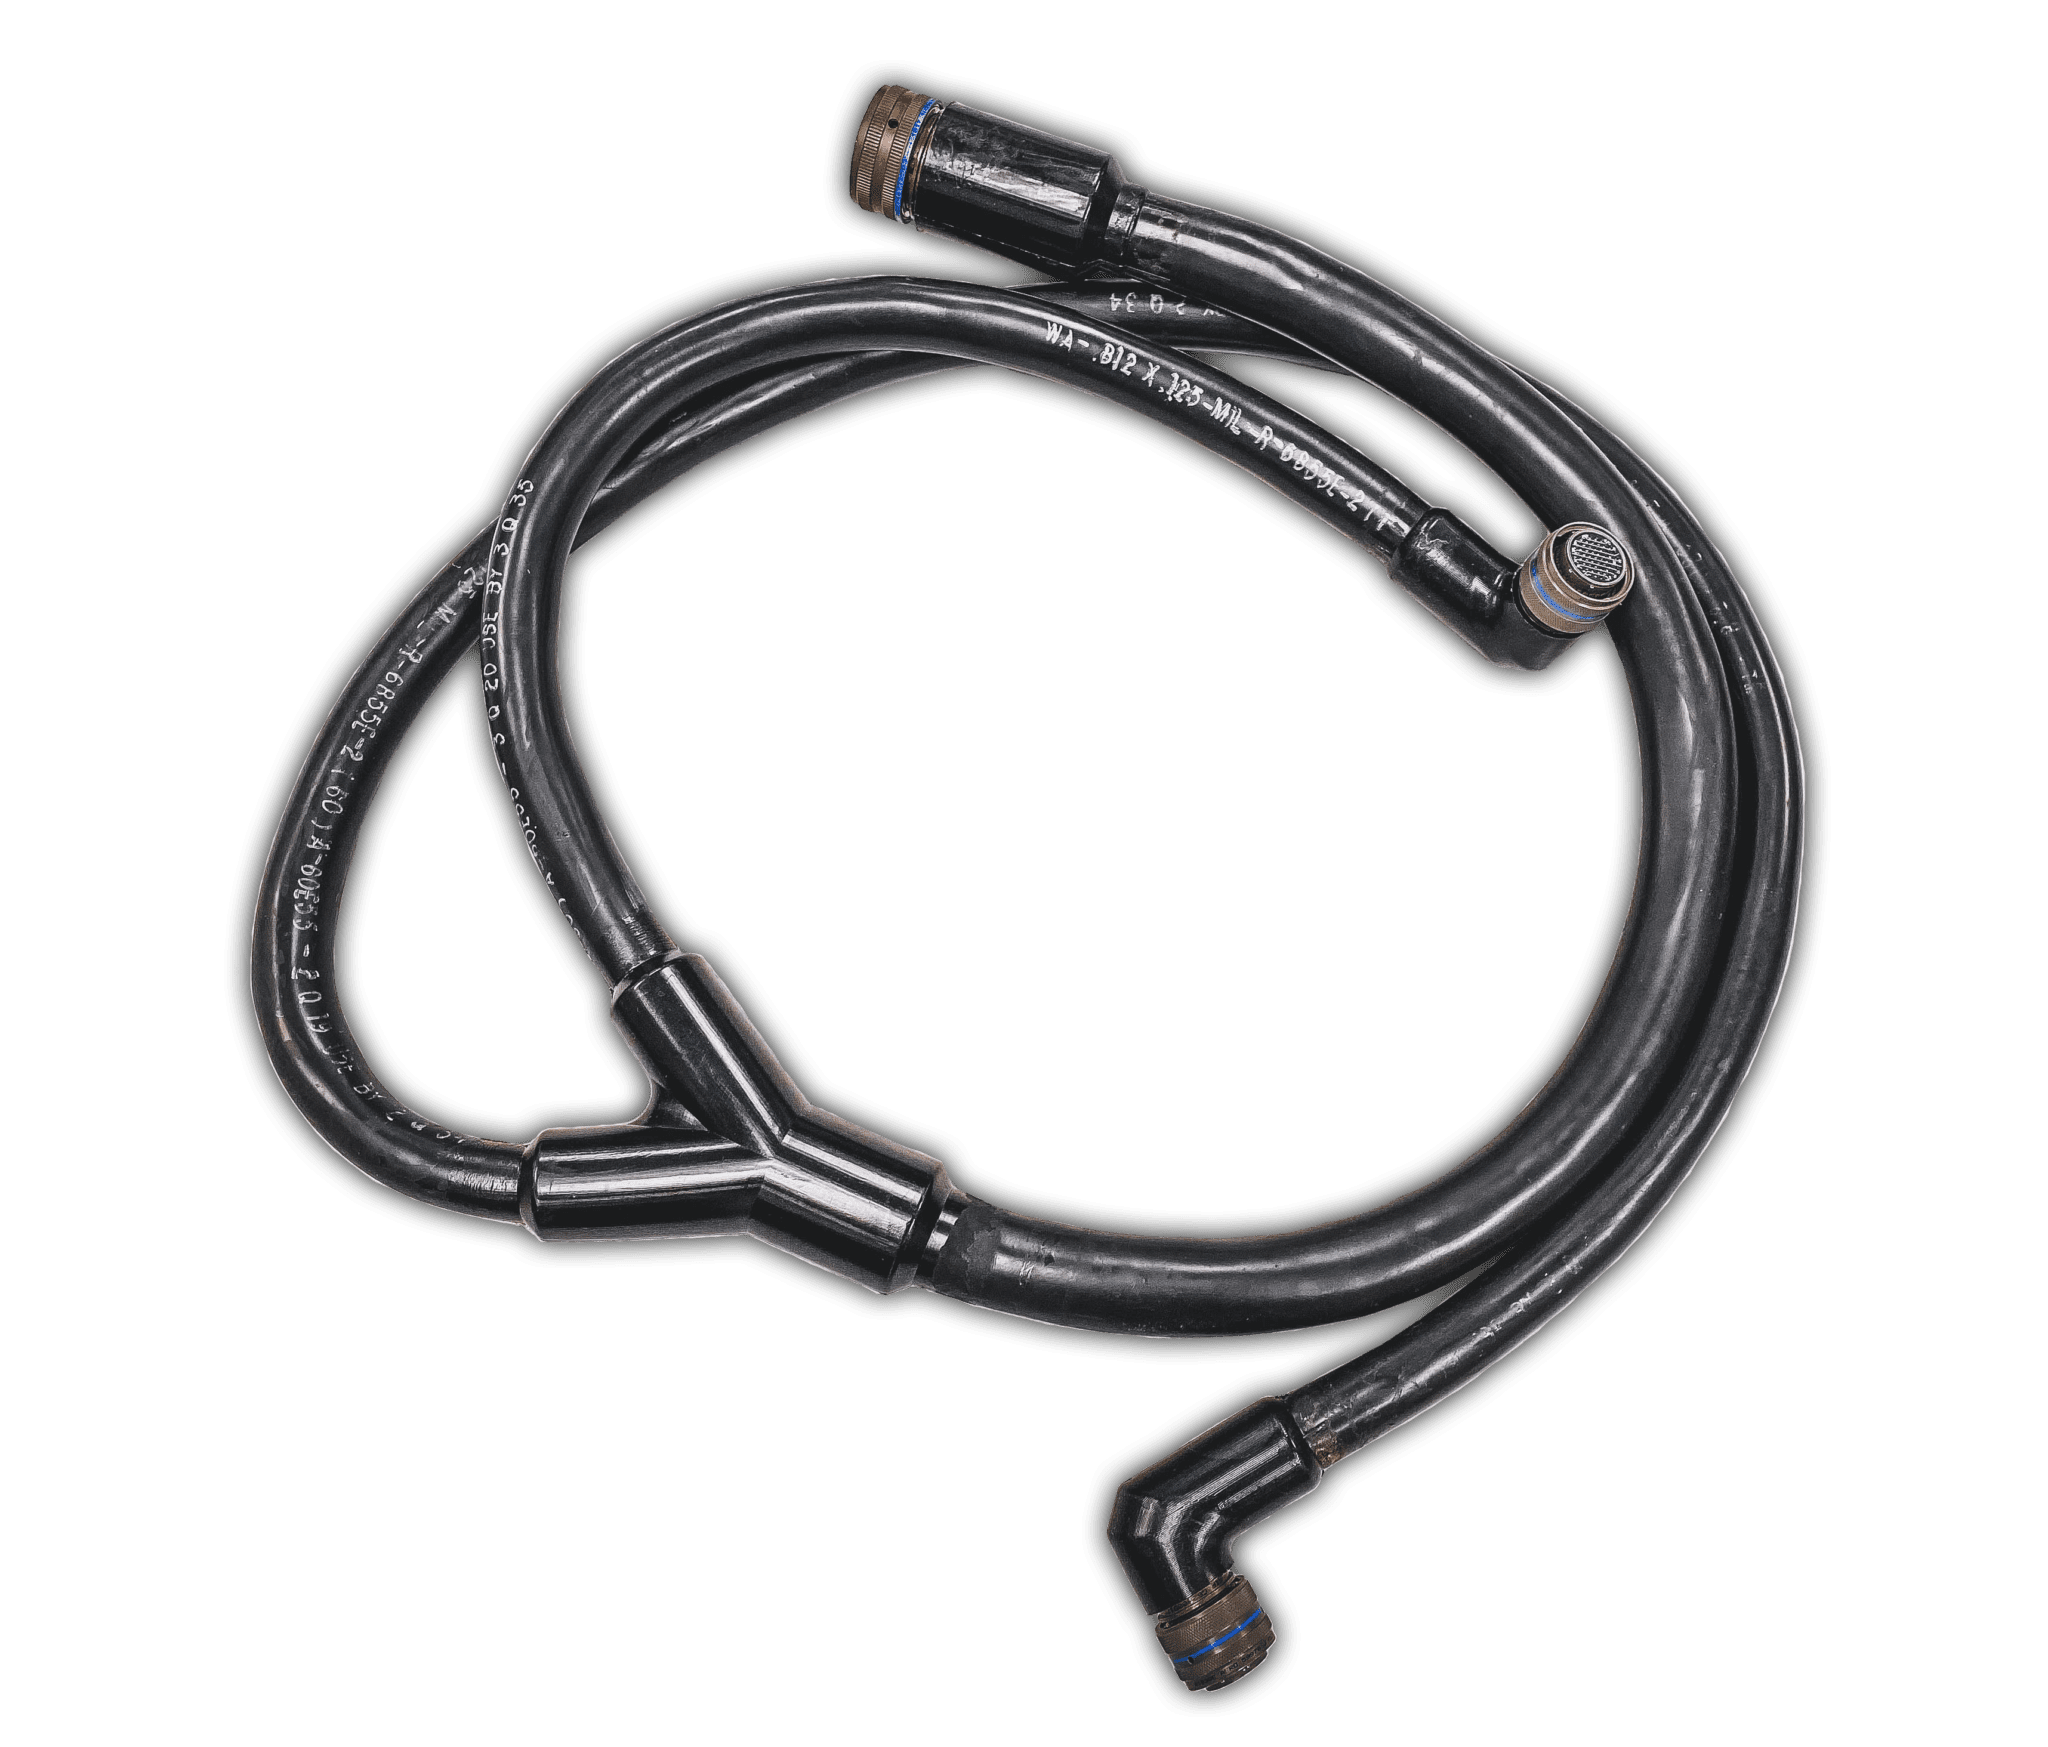 CDM overmolded cable